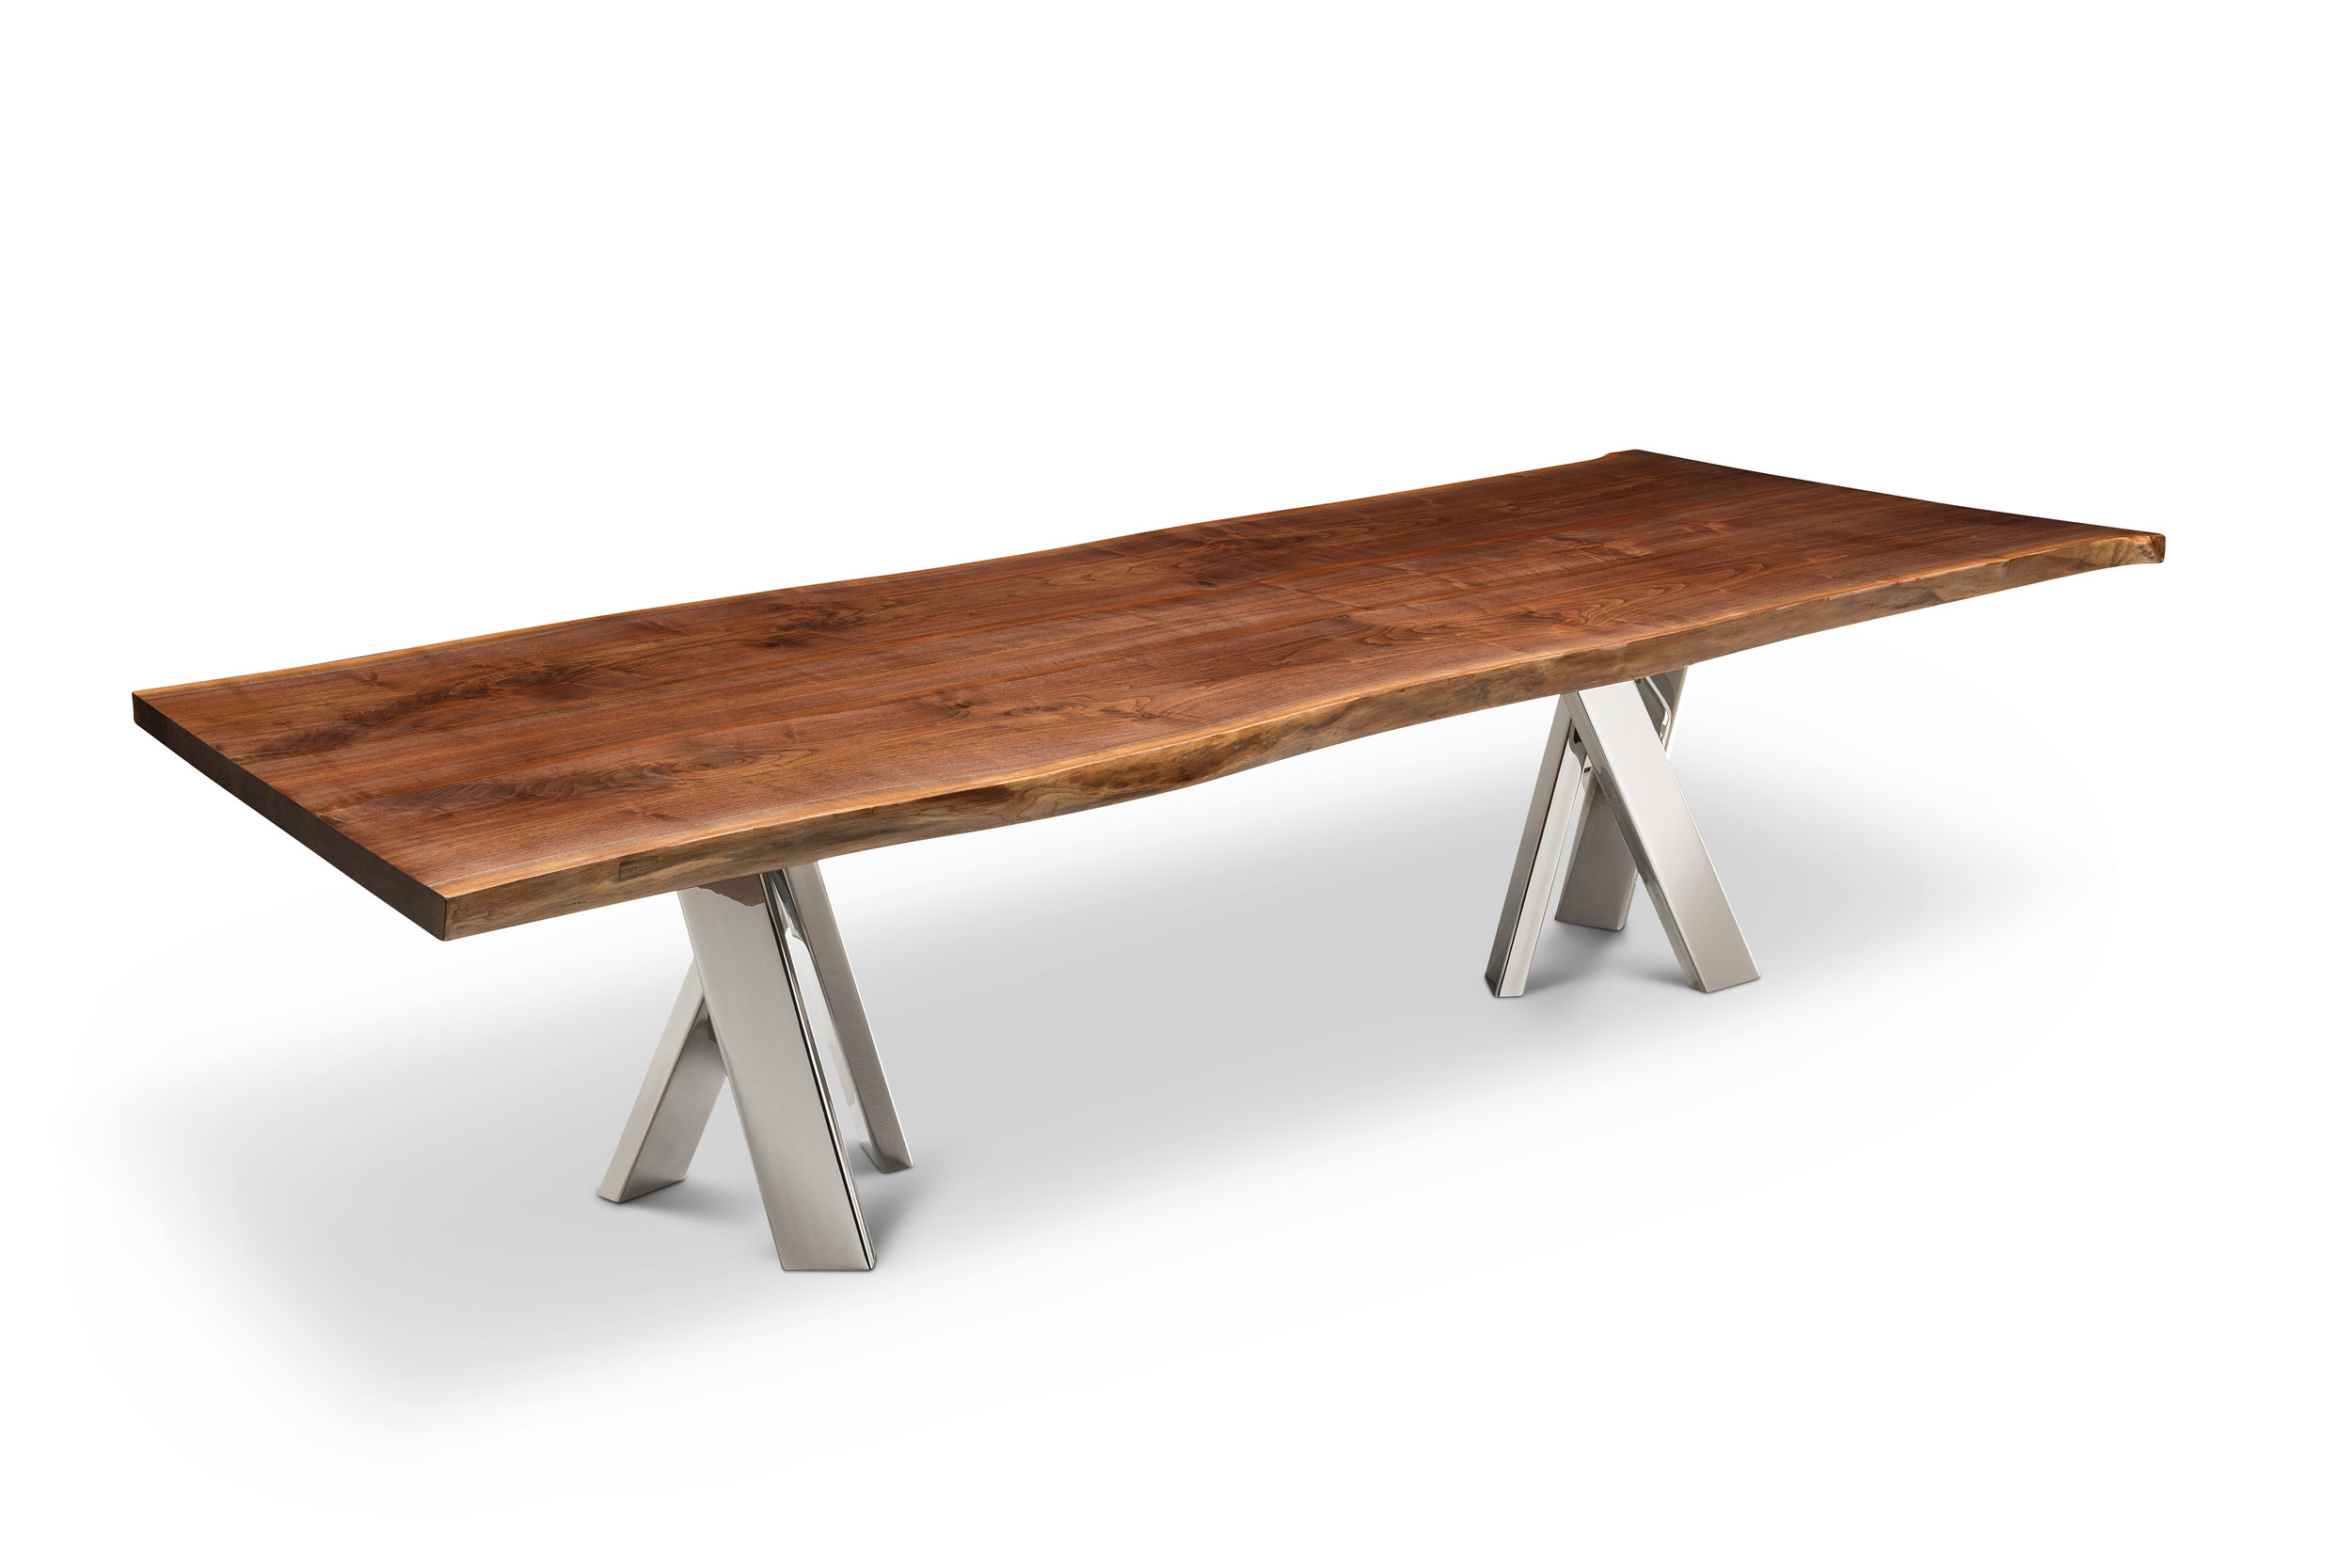 42" x 120" Dining Table